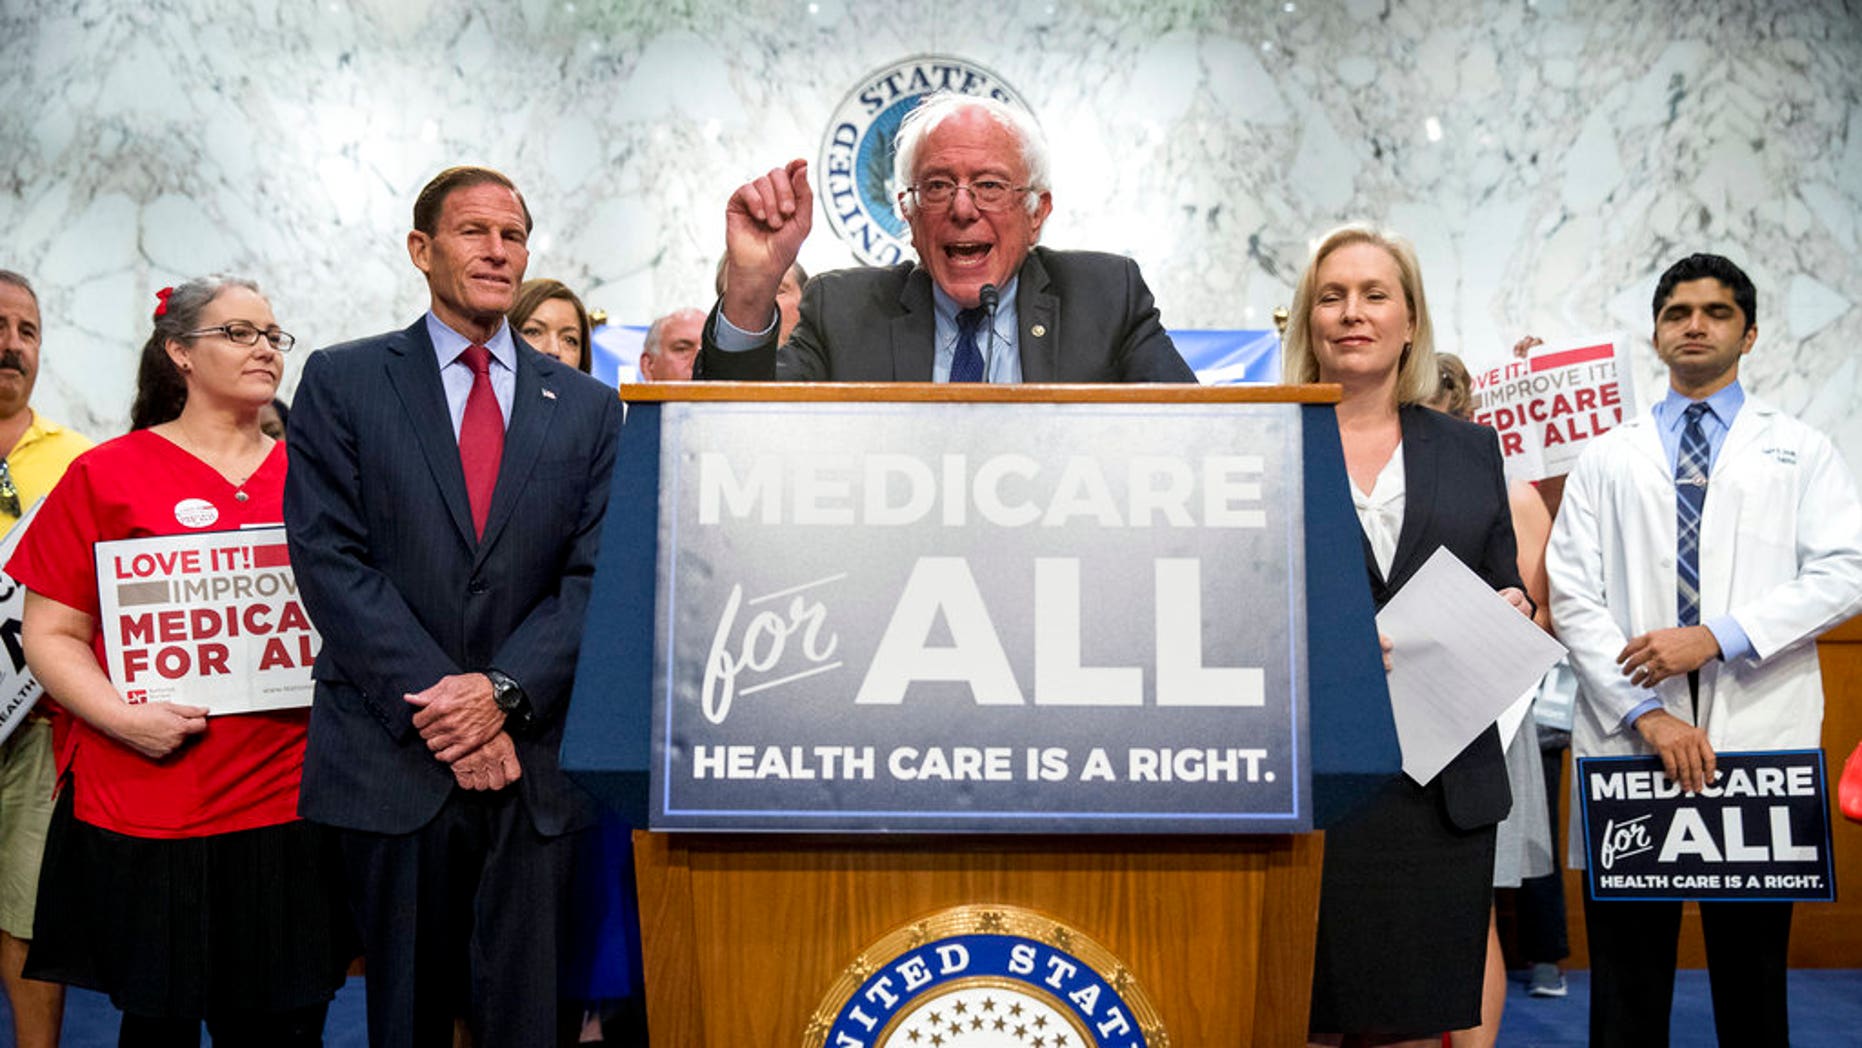 Beware: Medicare-for-all is fool